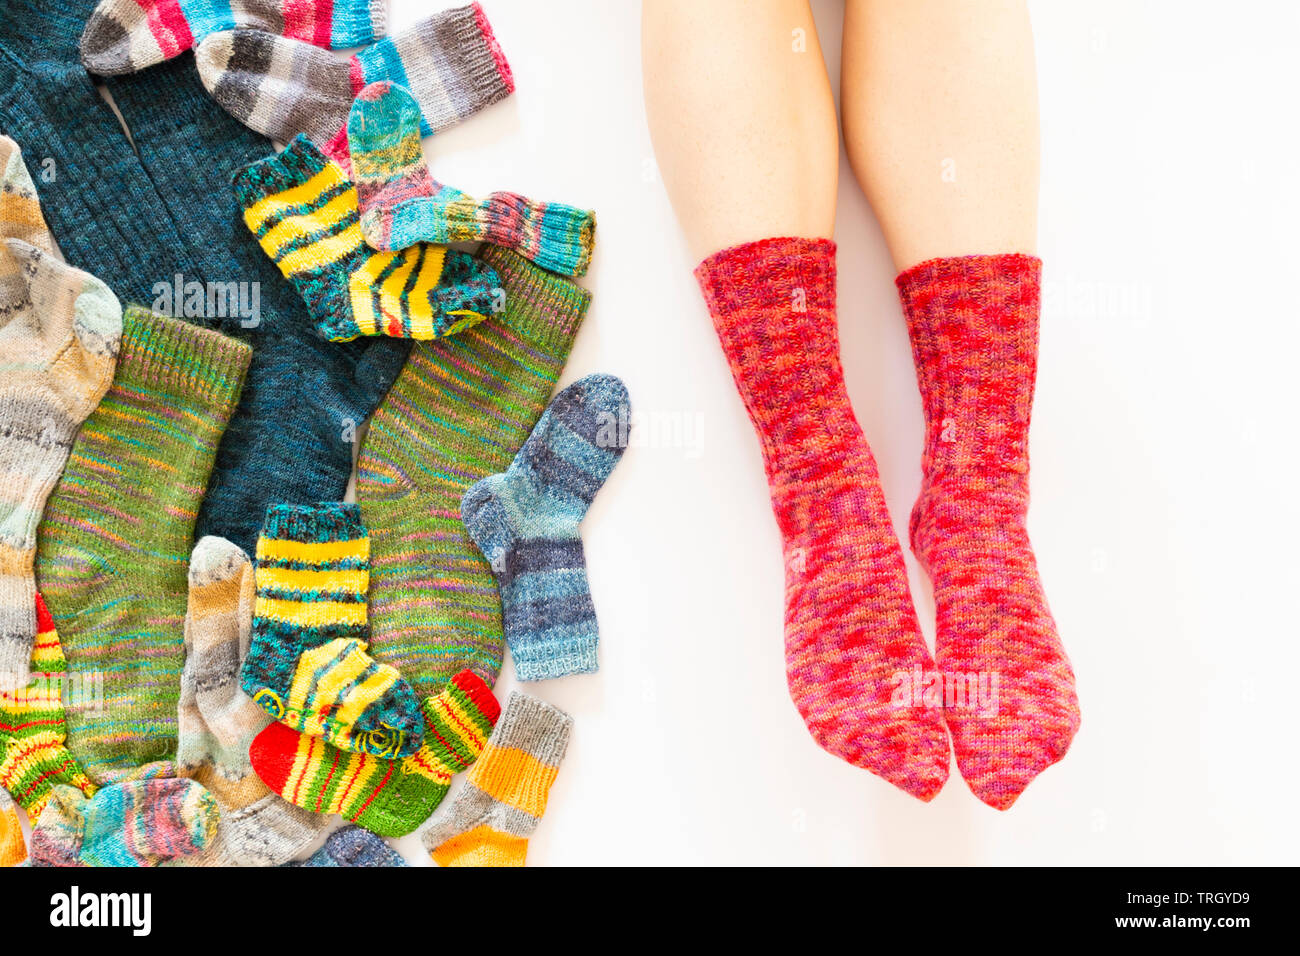 Top view of an assortment of colorful woolen socks of various sizes on white background with a pair of feet wearing red socks Stock Photo